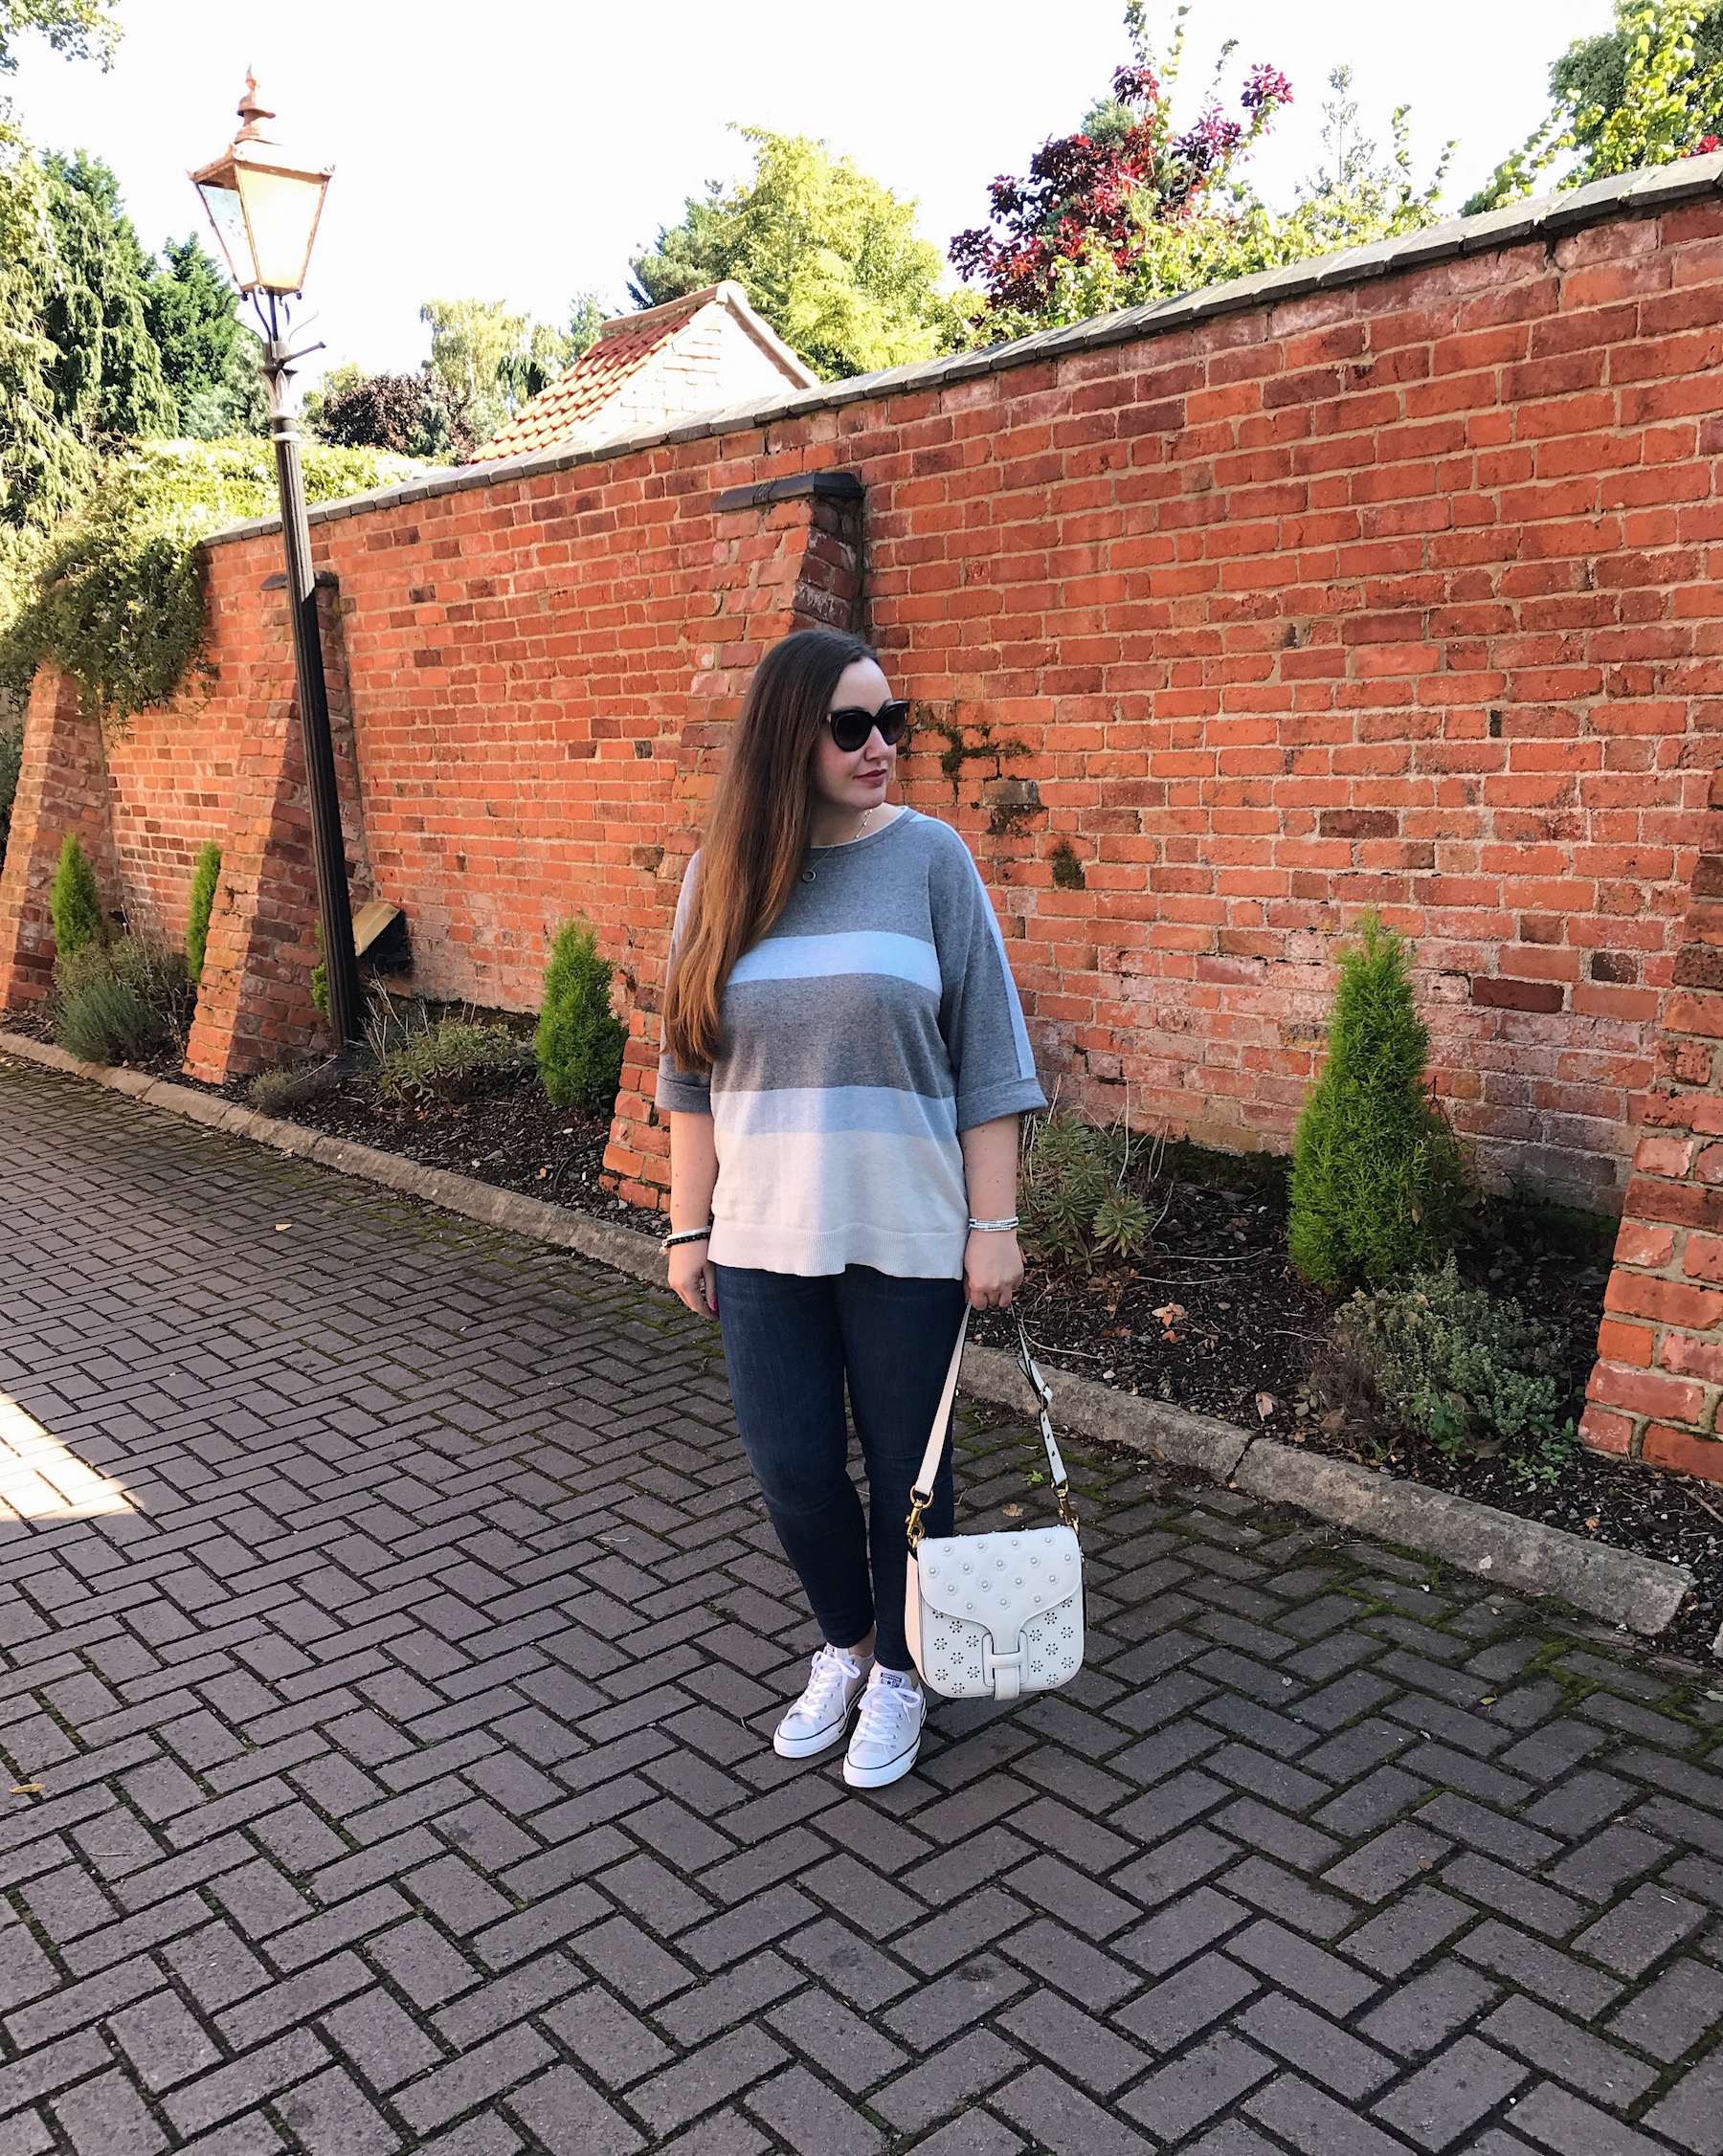 Striped Short sleeved jumper with jeans and trainers